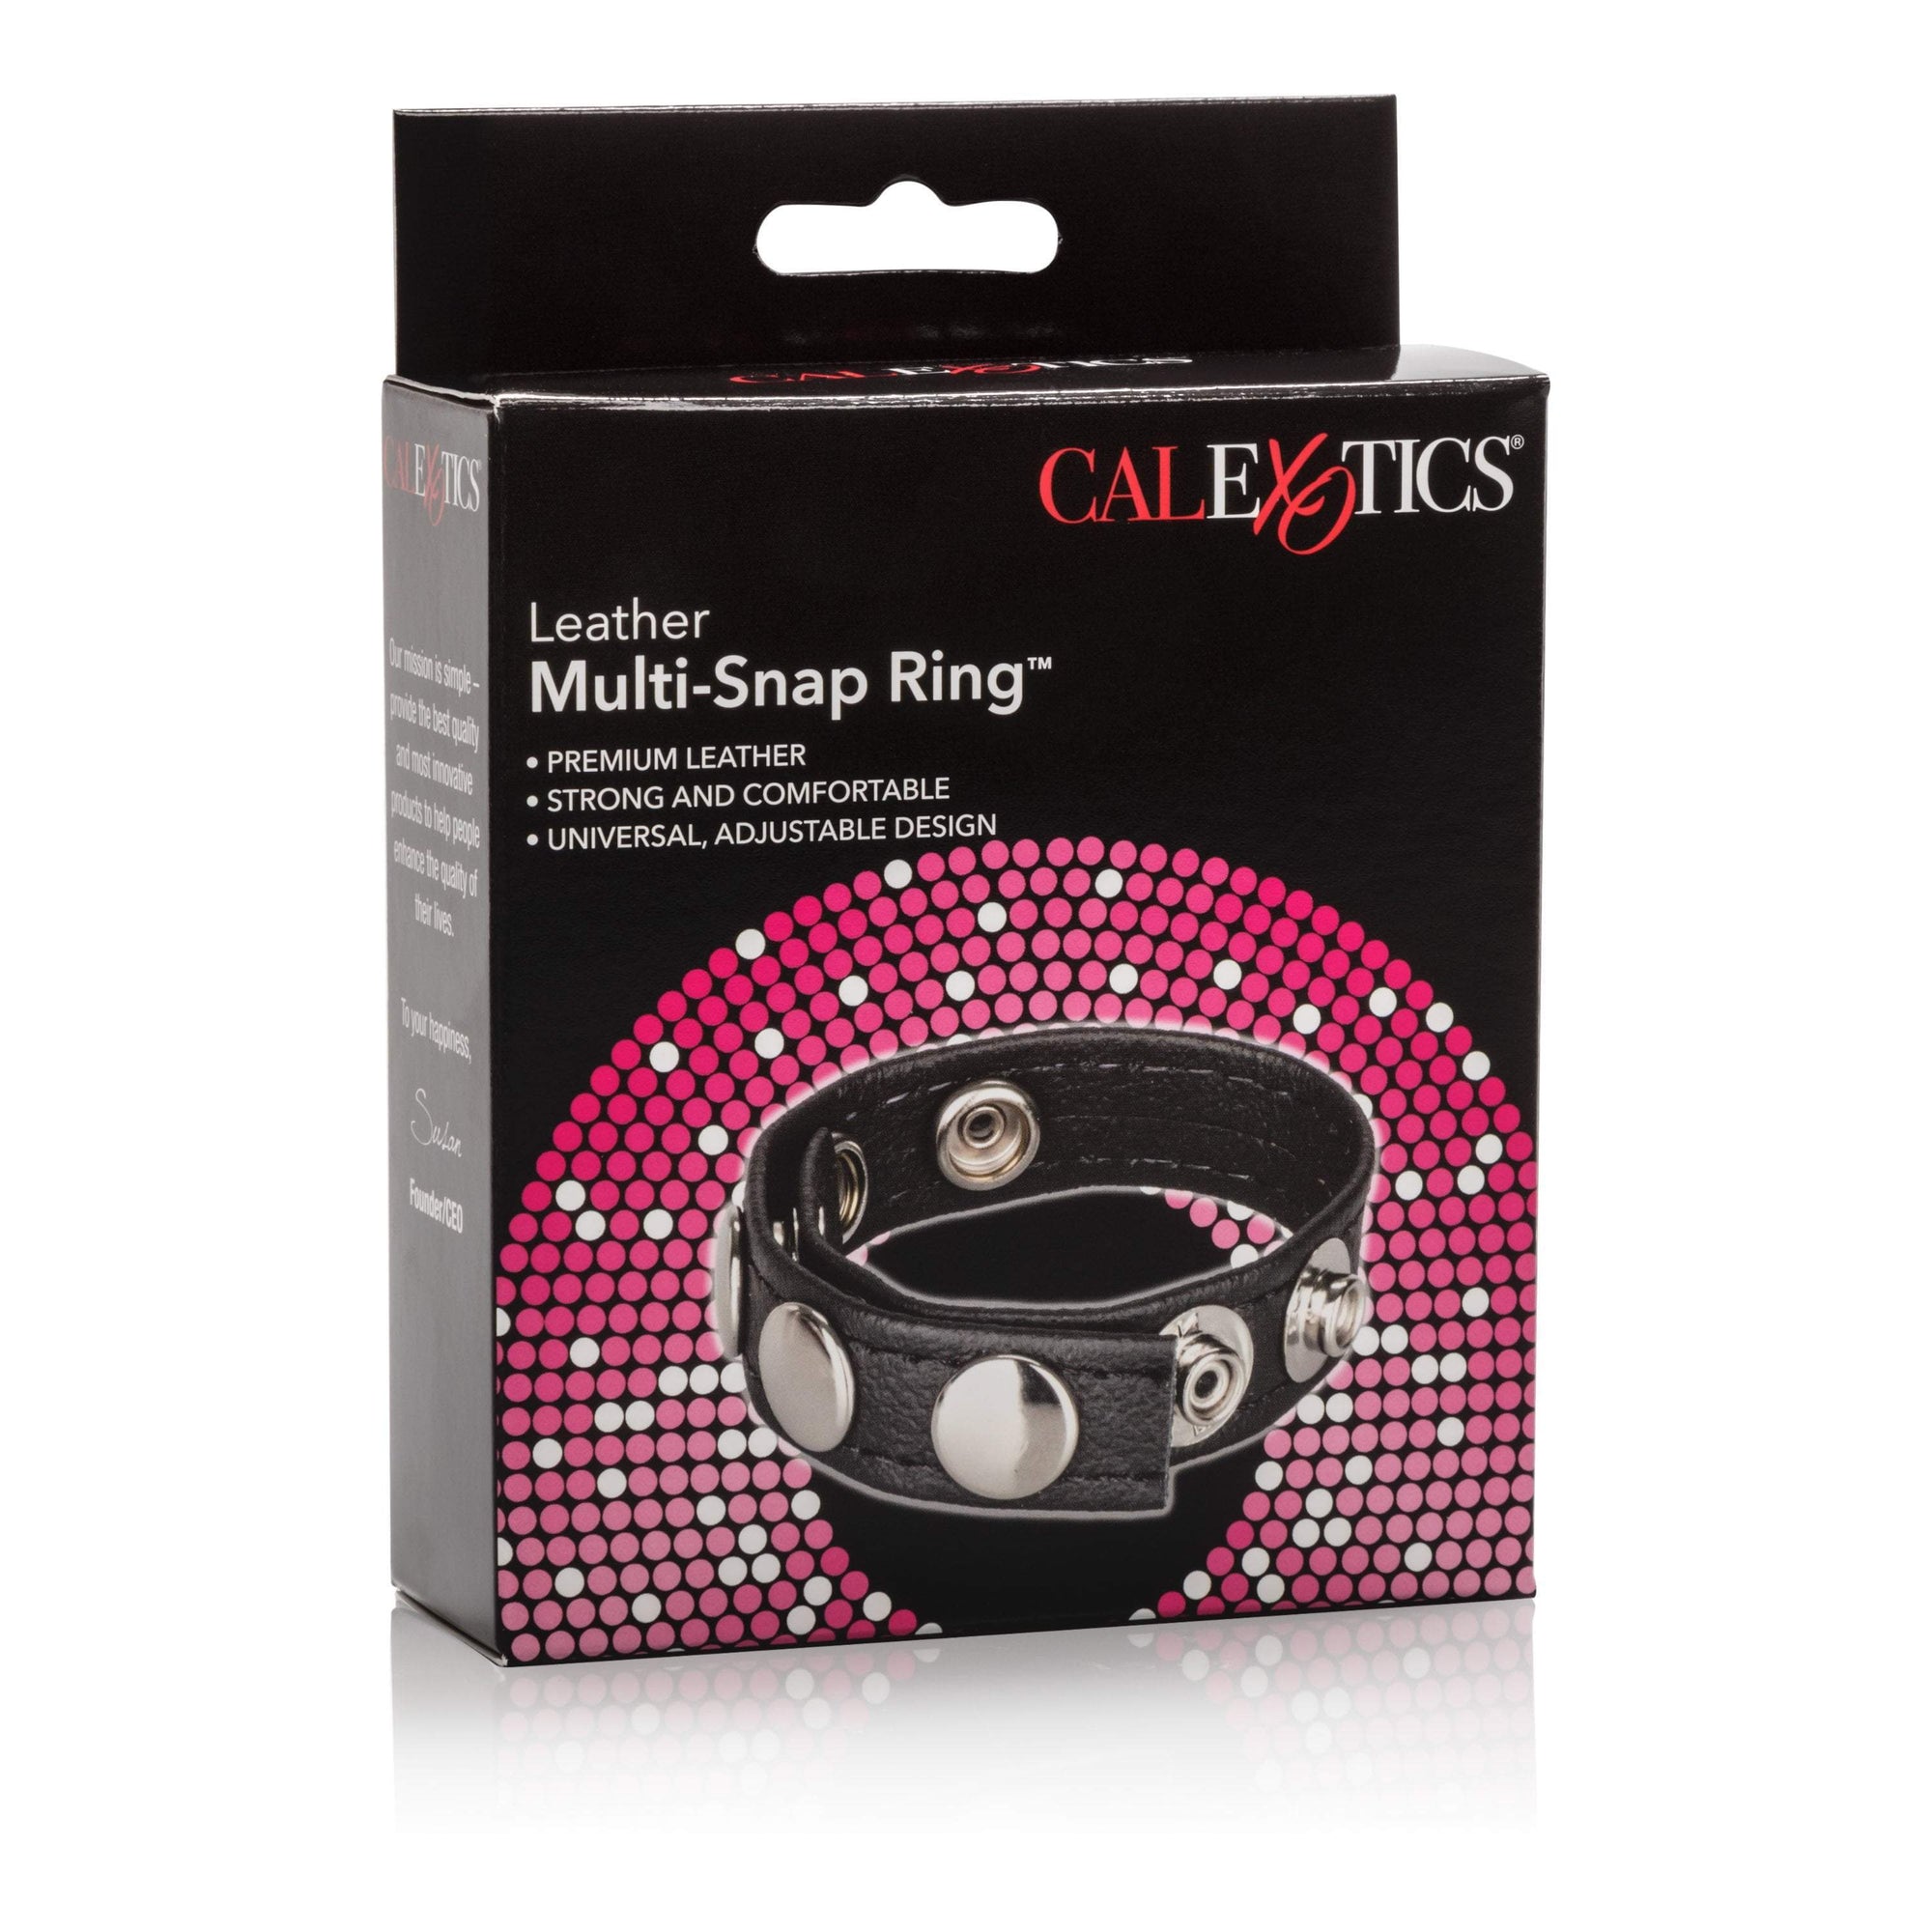 California Exotics - Leather Multi-Snap Cock Ring (Black) Leather Cock Ring (Non Vibration)